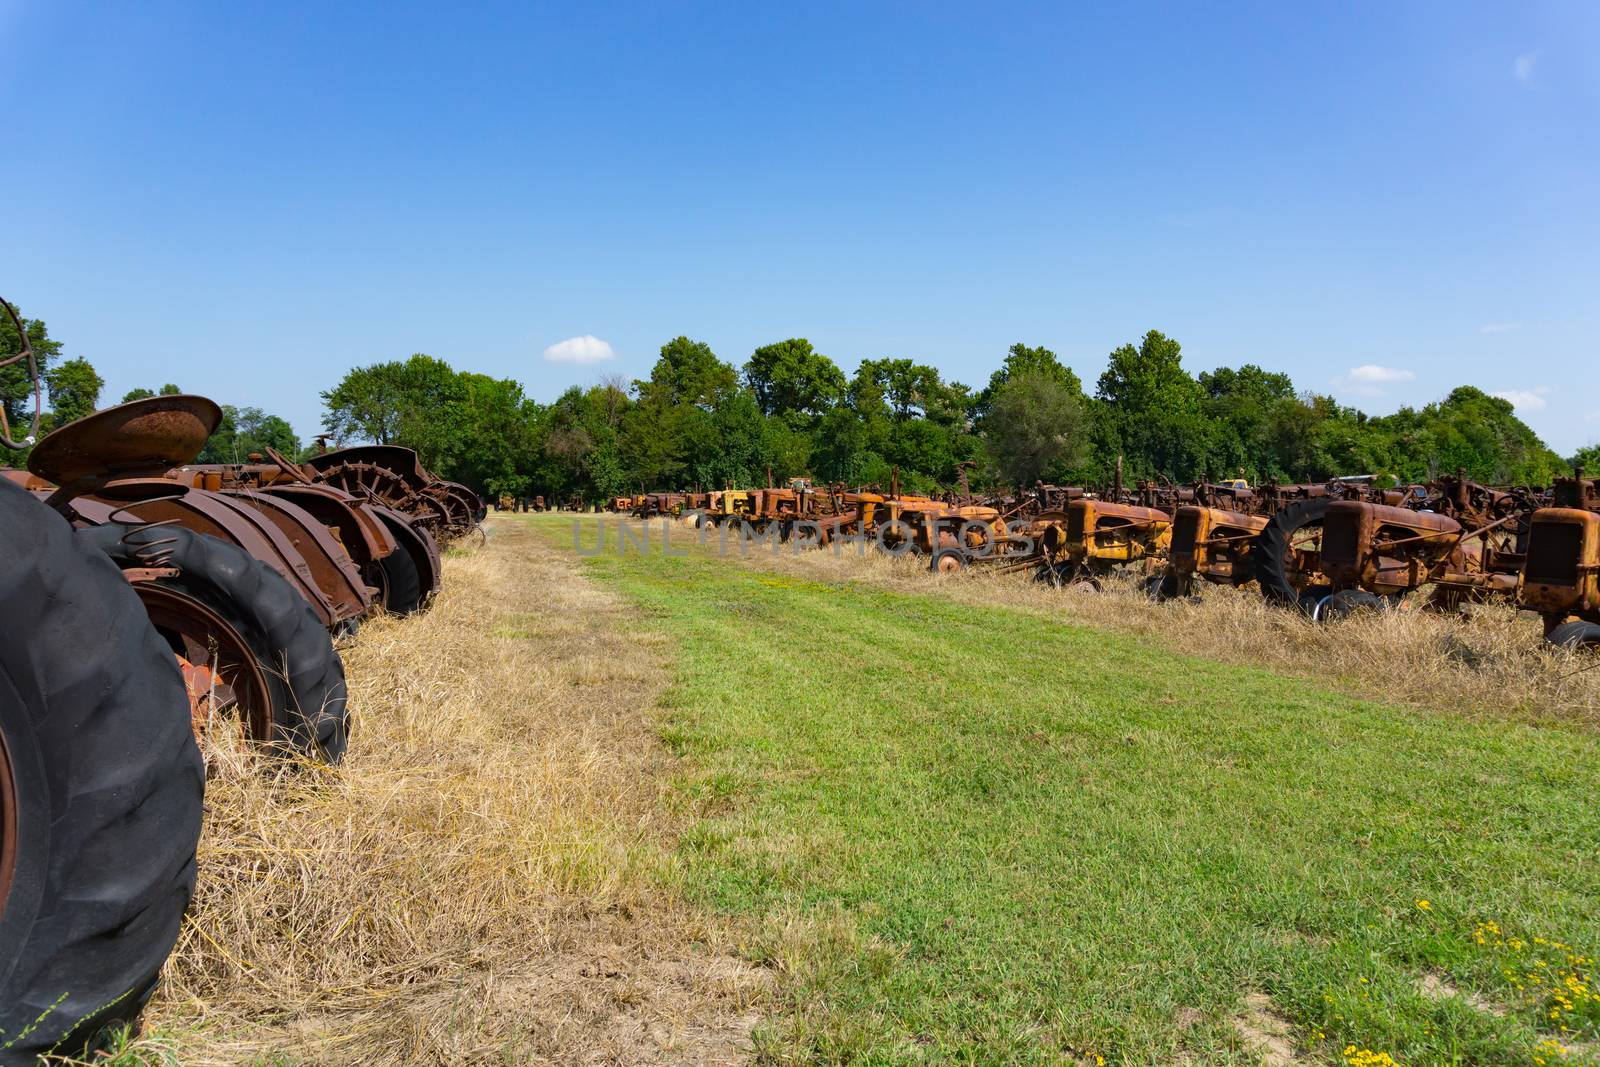 Old equipment and machinery and dead tractors lined up in field by brians101